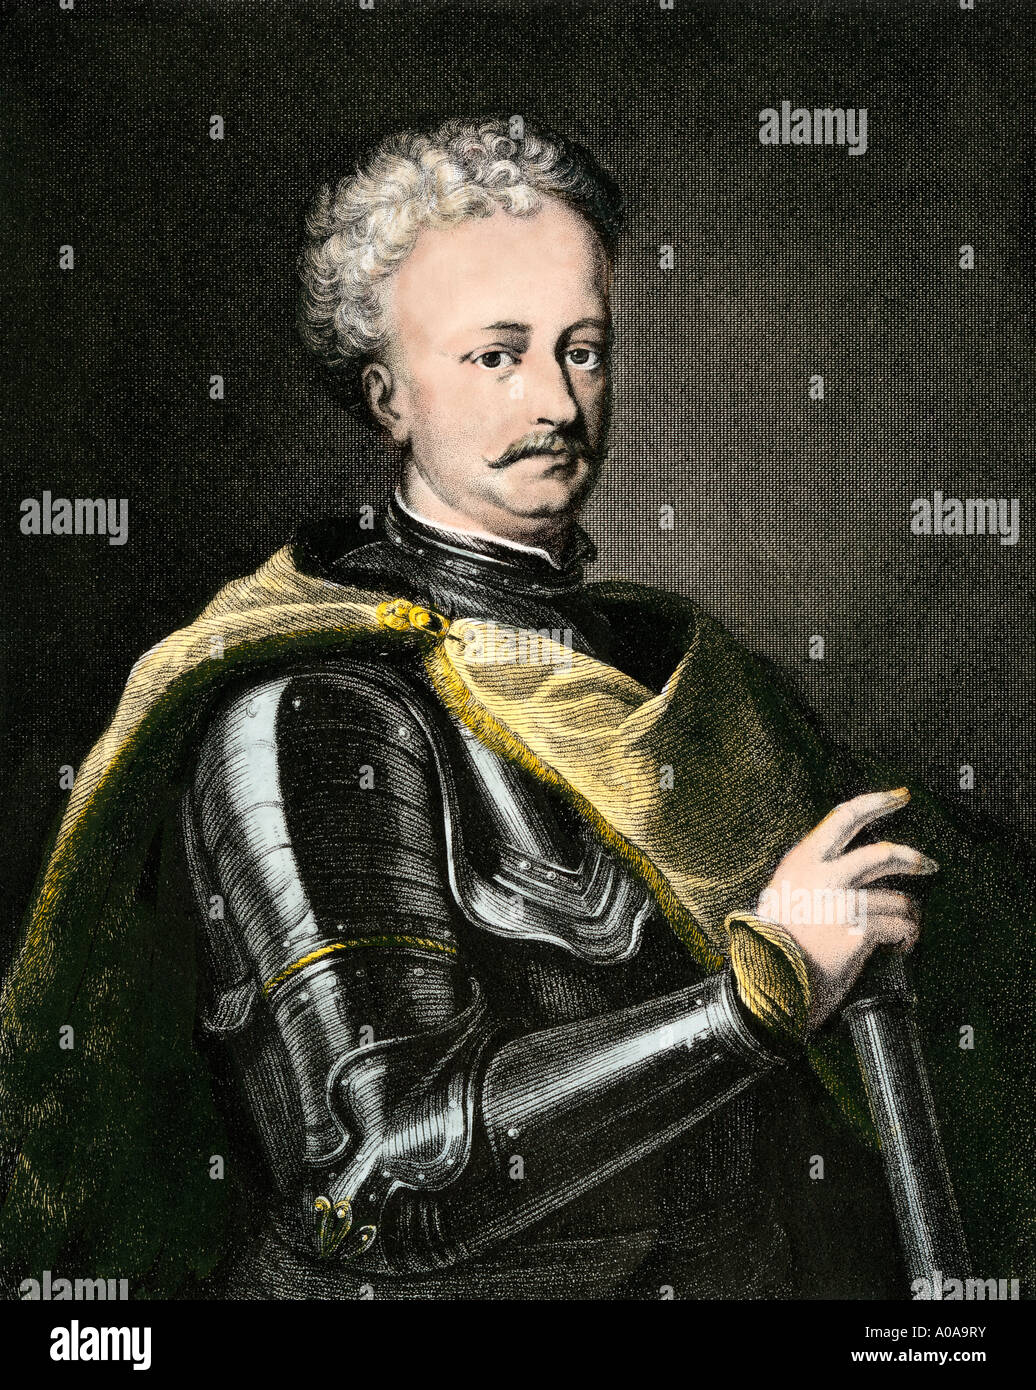 Tsar Peter the Great. Hand-colored steel engraving Stock Photo